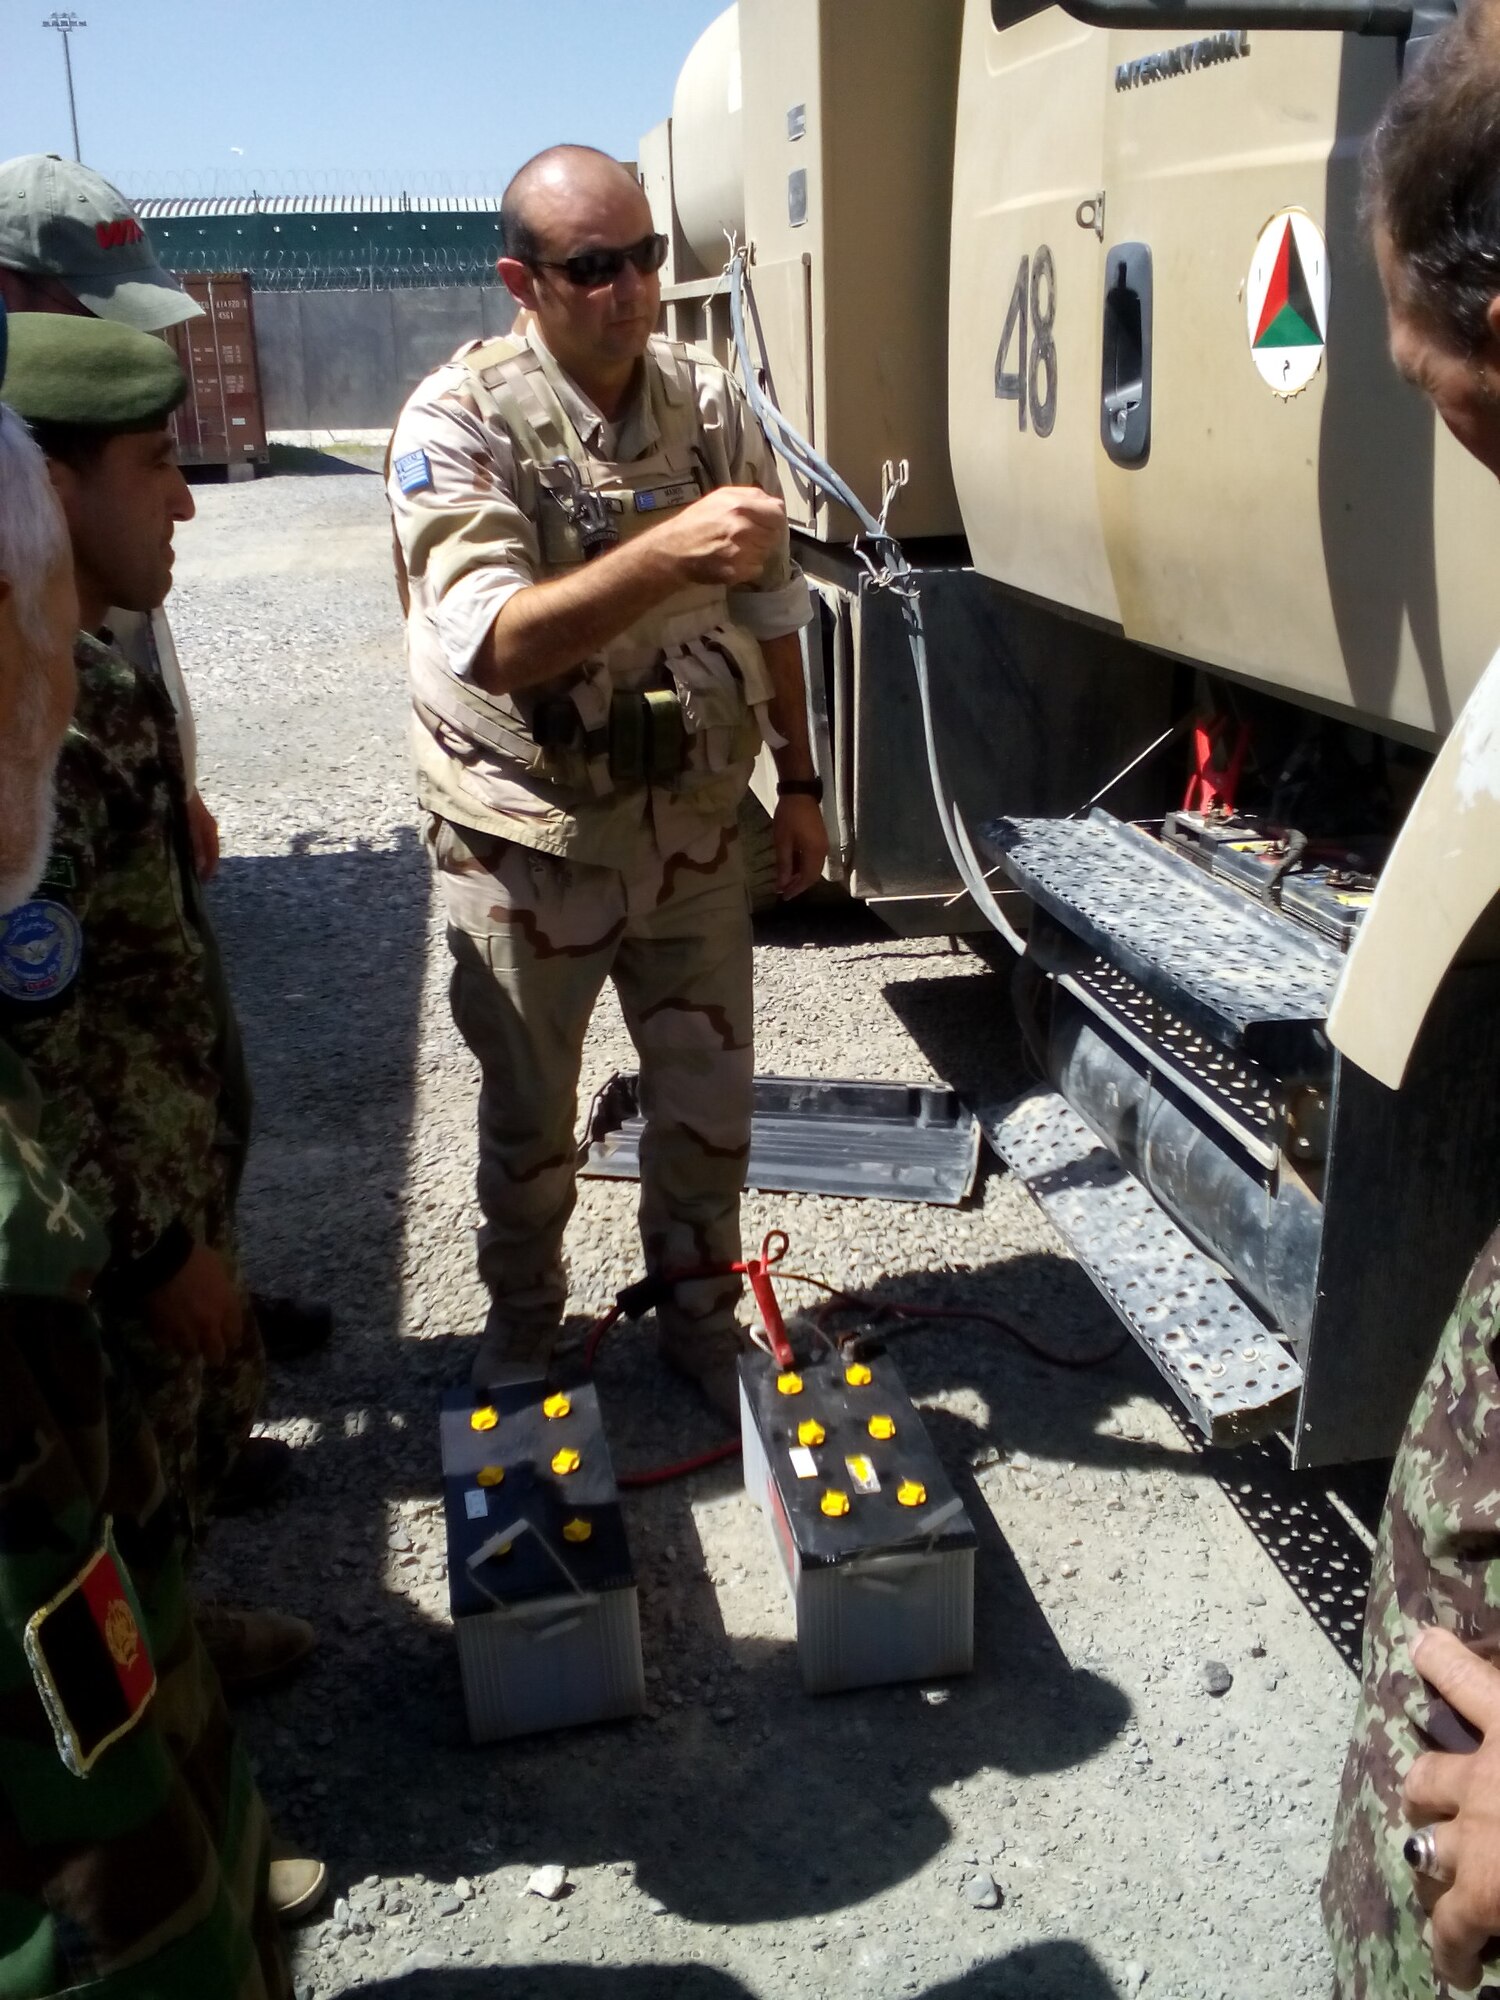 Greek Warrant Officer Ioannidis Emmanouil, a 16-year vehicle mechanic quality control inspector and Train, Advise, Assist Command-Air (TAAC-Air) certified trainer, teaches Afghan National Army and Afghan Air Force vehicle maintainers at Kabul Air Wing Aug. 6, 2015.  TAAC-Air advisors and contractors work to refine AAF logistics, reduce new acquisitions and programs, and create a sustainable and capable air force to support the Afghan National Security Forces in the coming years. The Vehicle Maintenance Training Program (VMTP) is one focus area to acquire coalition expertise to provide meaningful instruction on specialized equipment and contractor support to the AAF. They began training June 27, 2015. (U.S. Air Force photo by Capt. Eydie Sakura/Released)